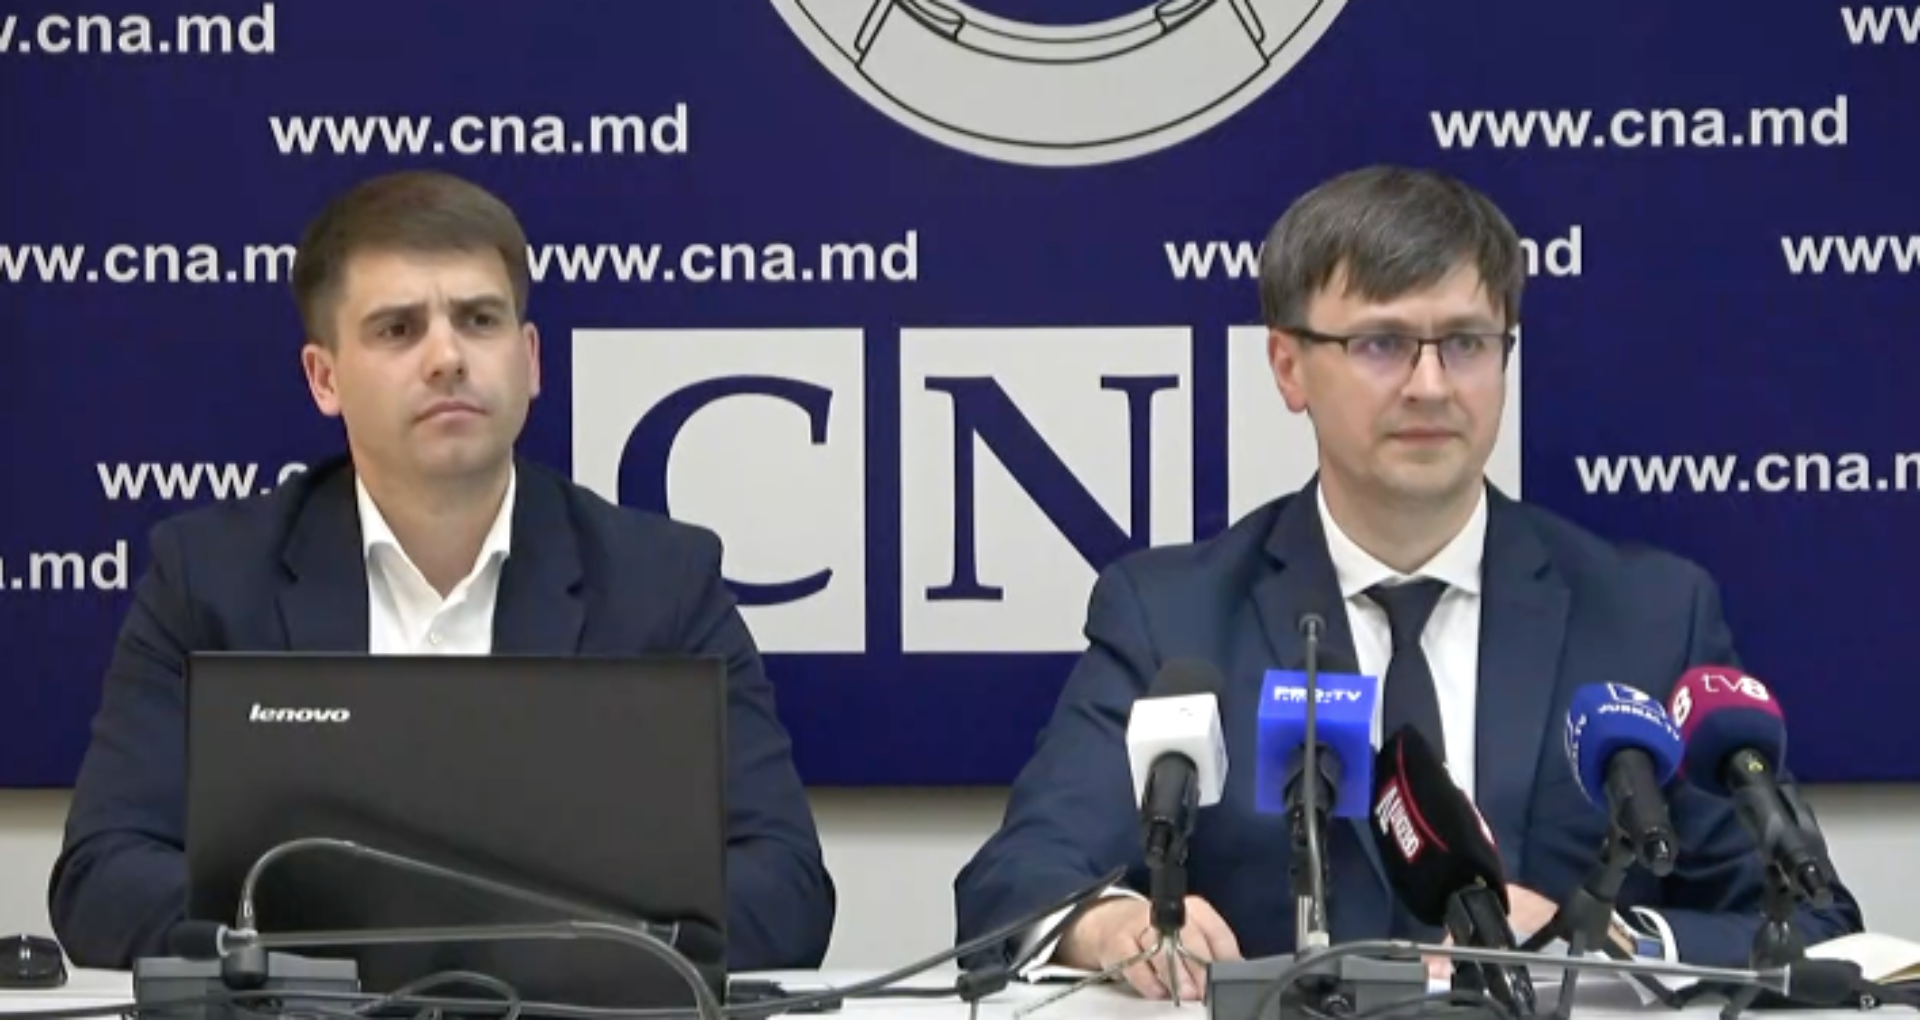 The request for the resignation of magistrate Alexandru Sandu, accepted by the Superior Council of Magistracy: “If the pension is almost equal to the salary, what is Judge Sandu doing at work?”